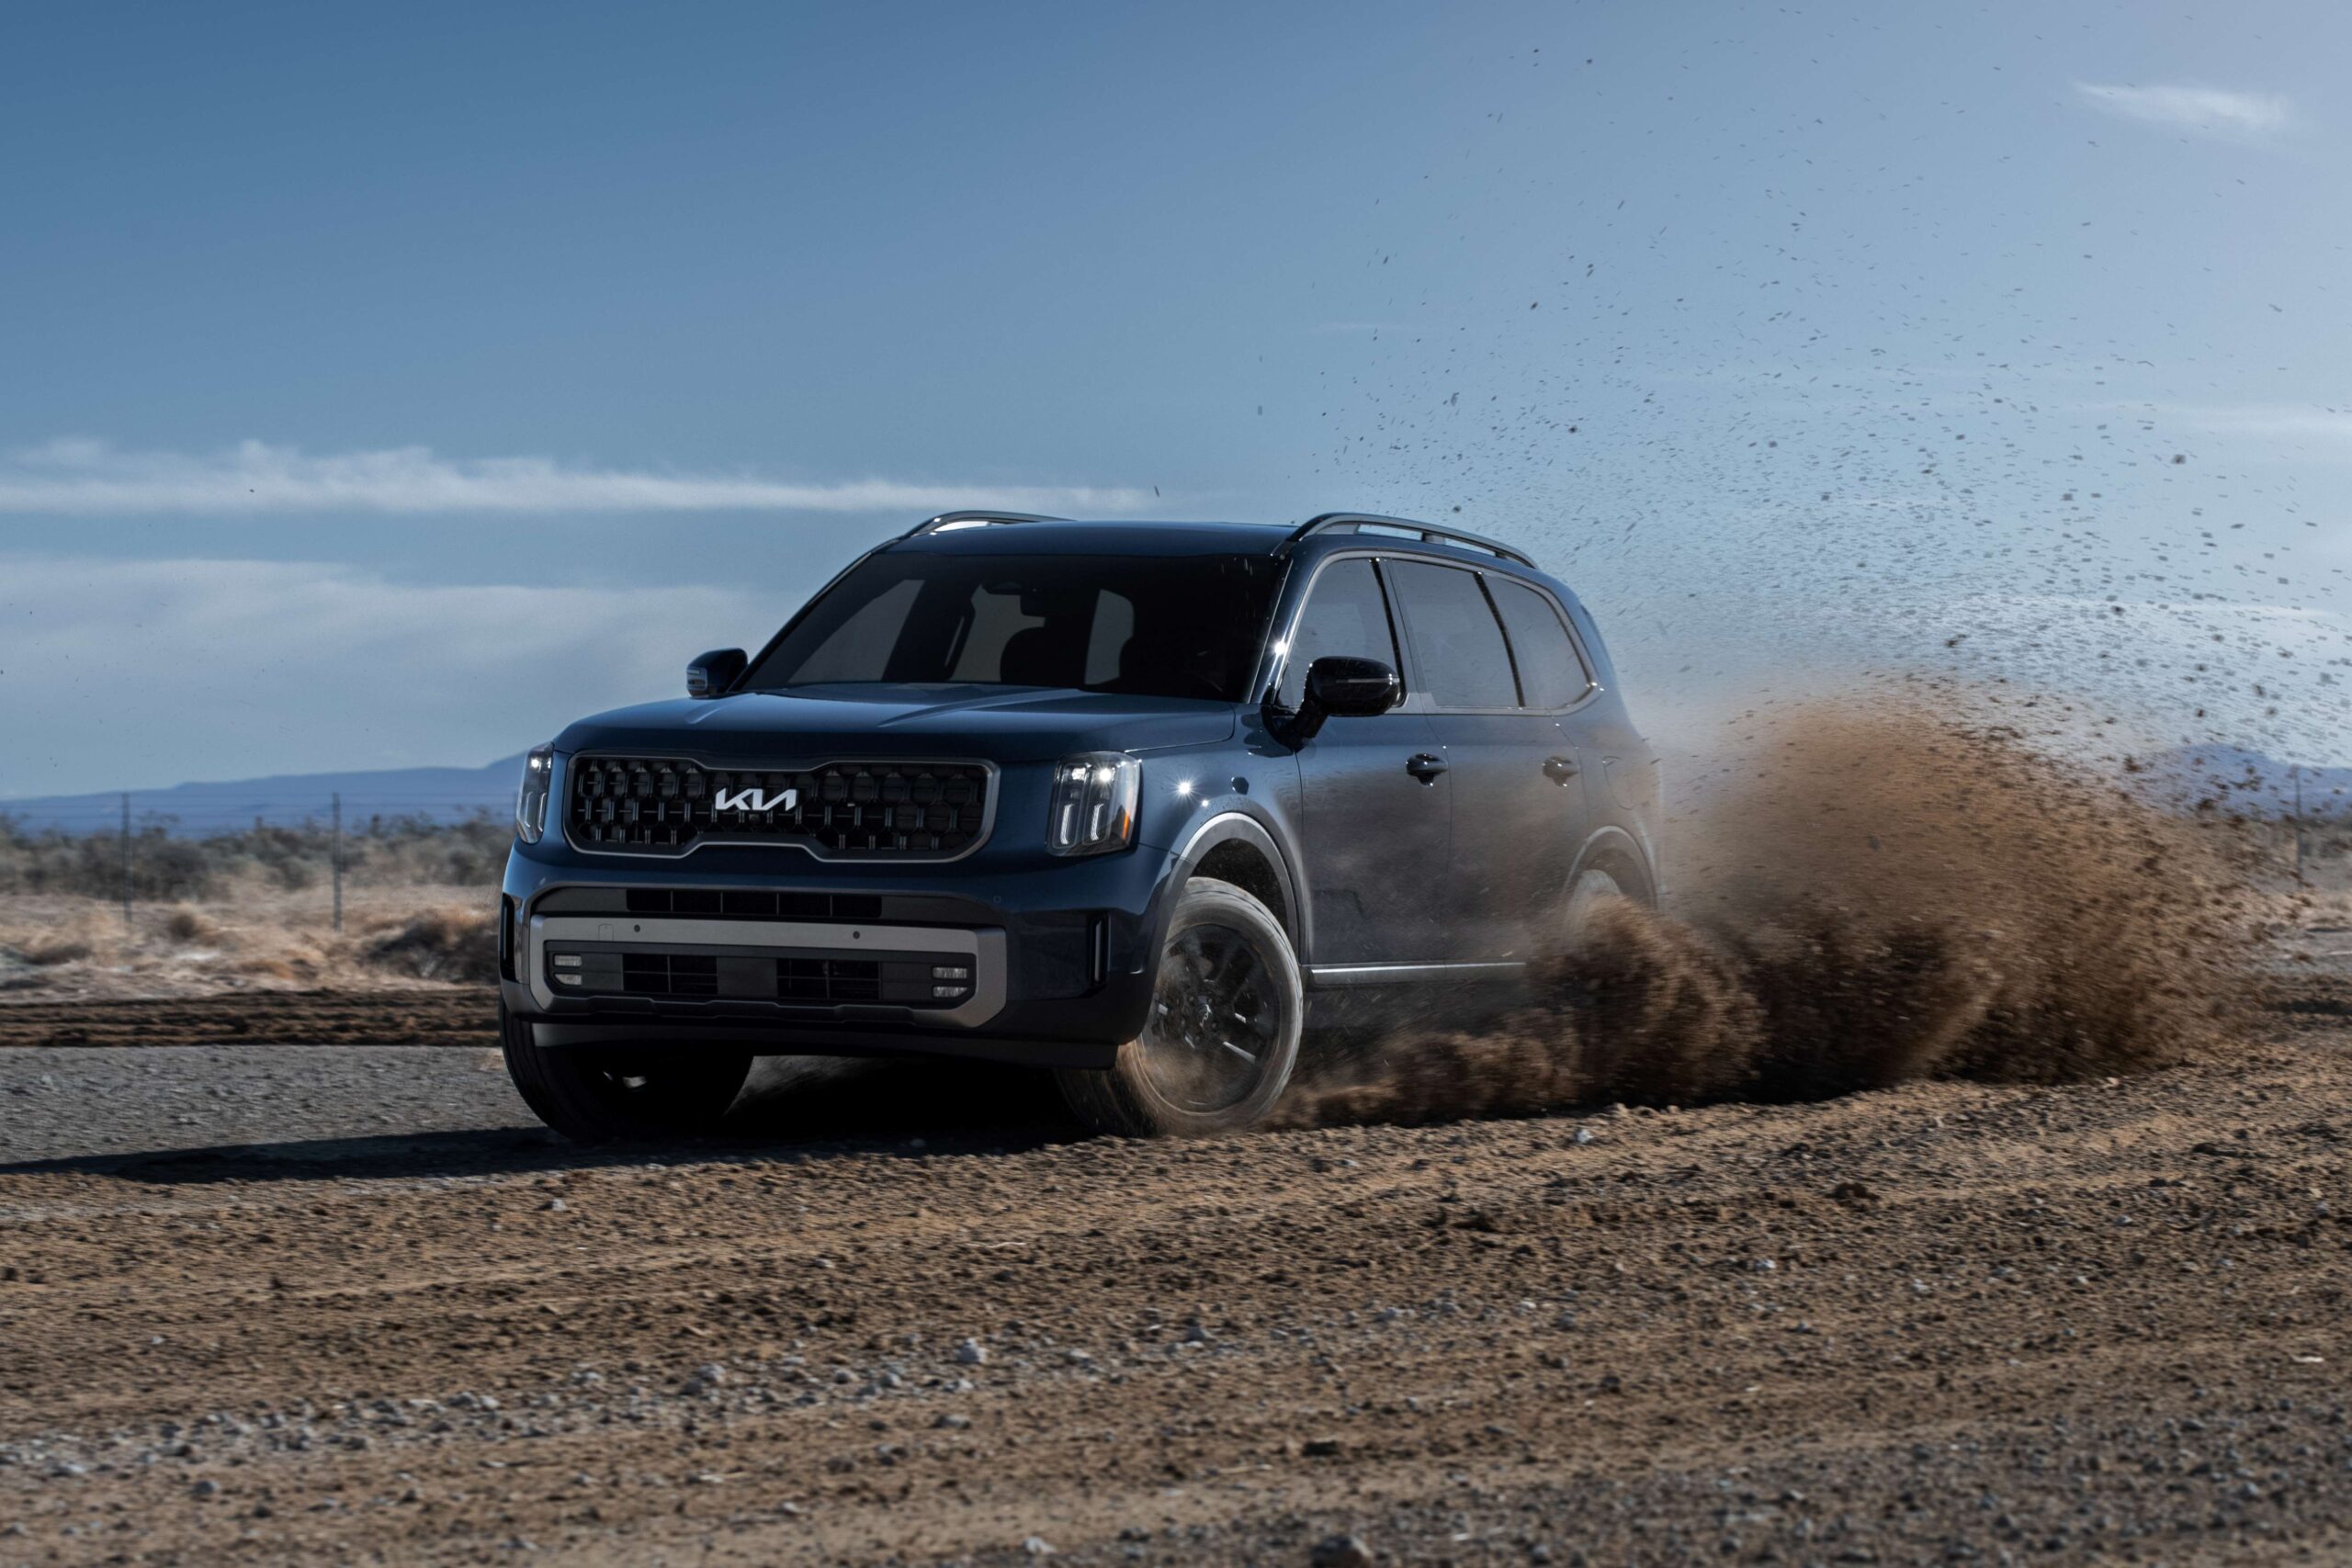 The new Kia Telluride arrives at the New York Auto Show